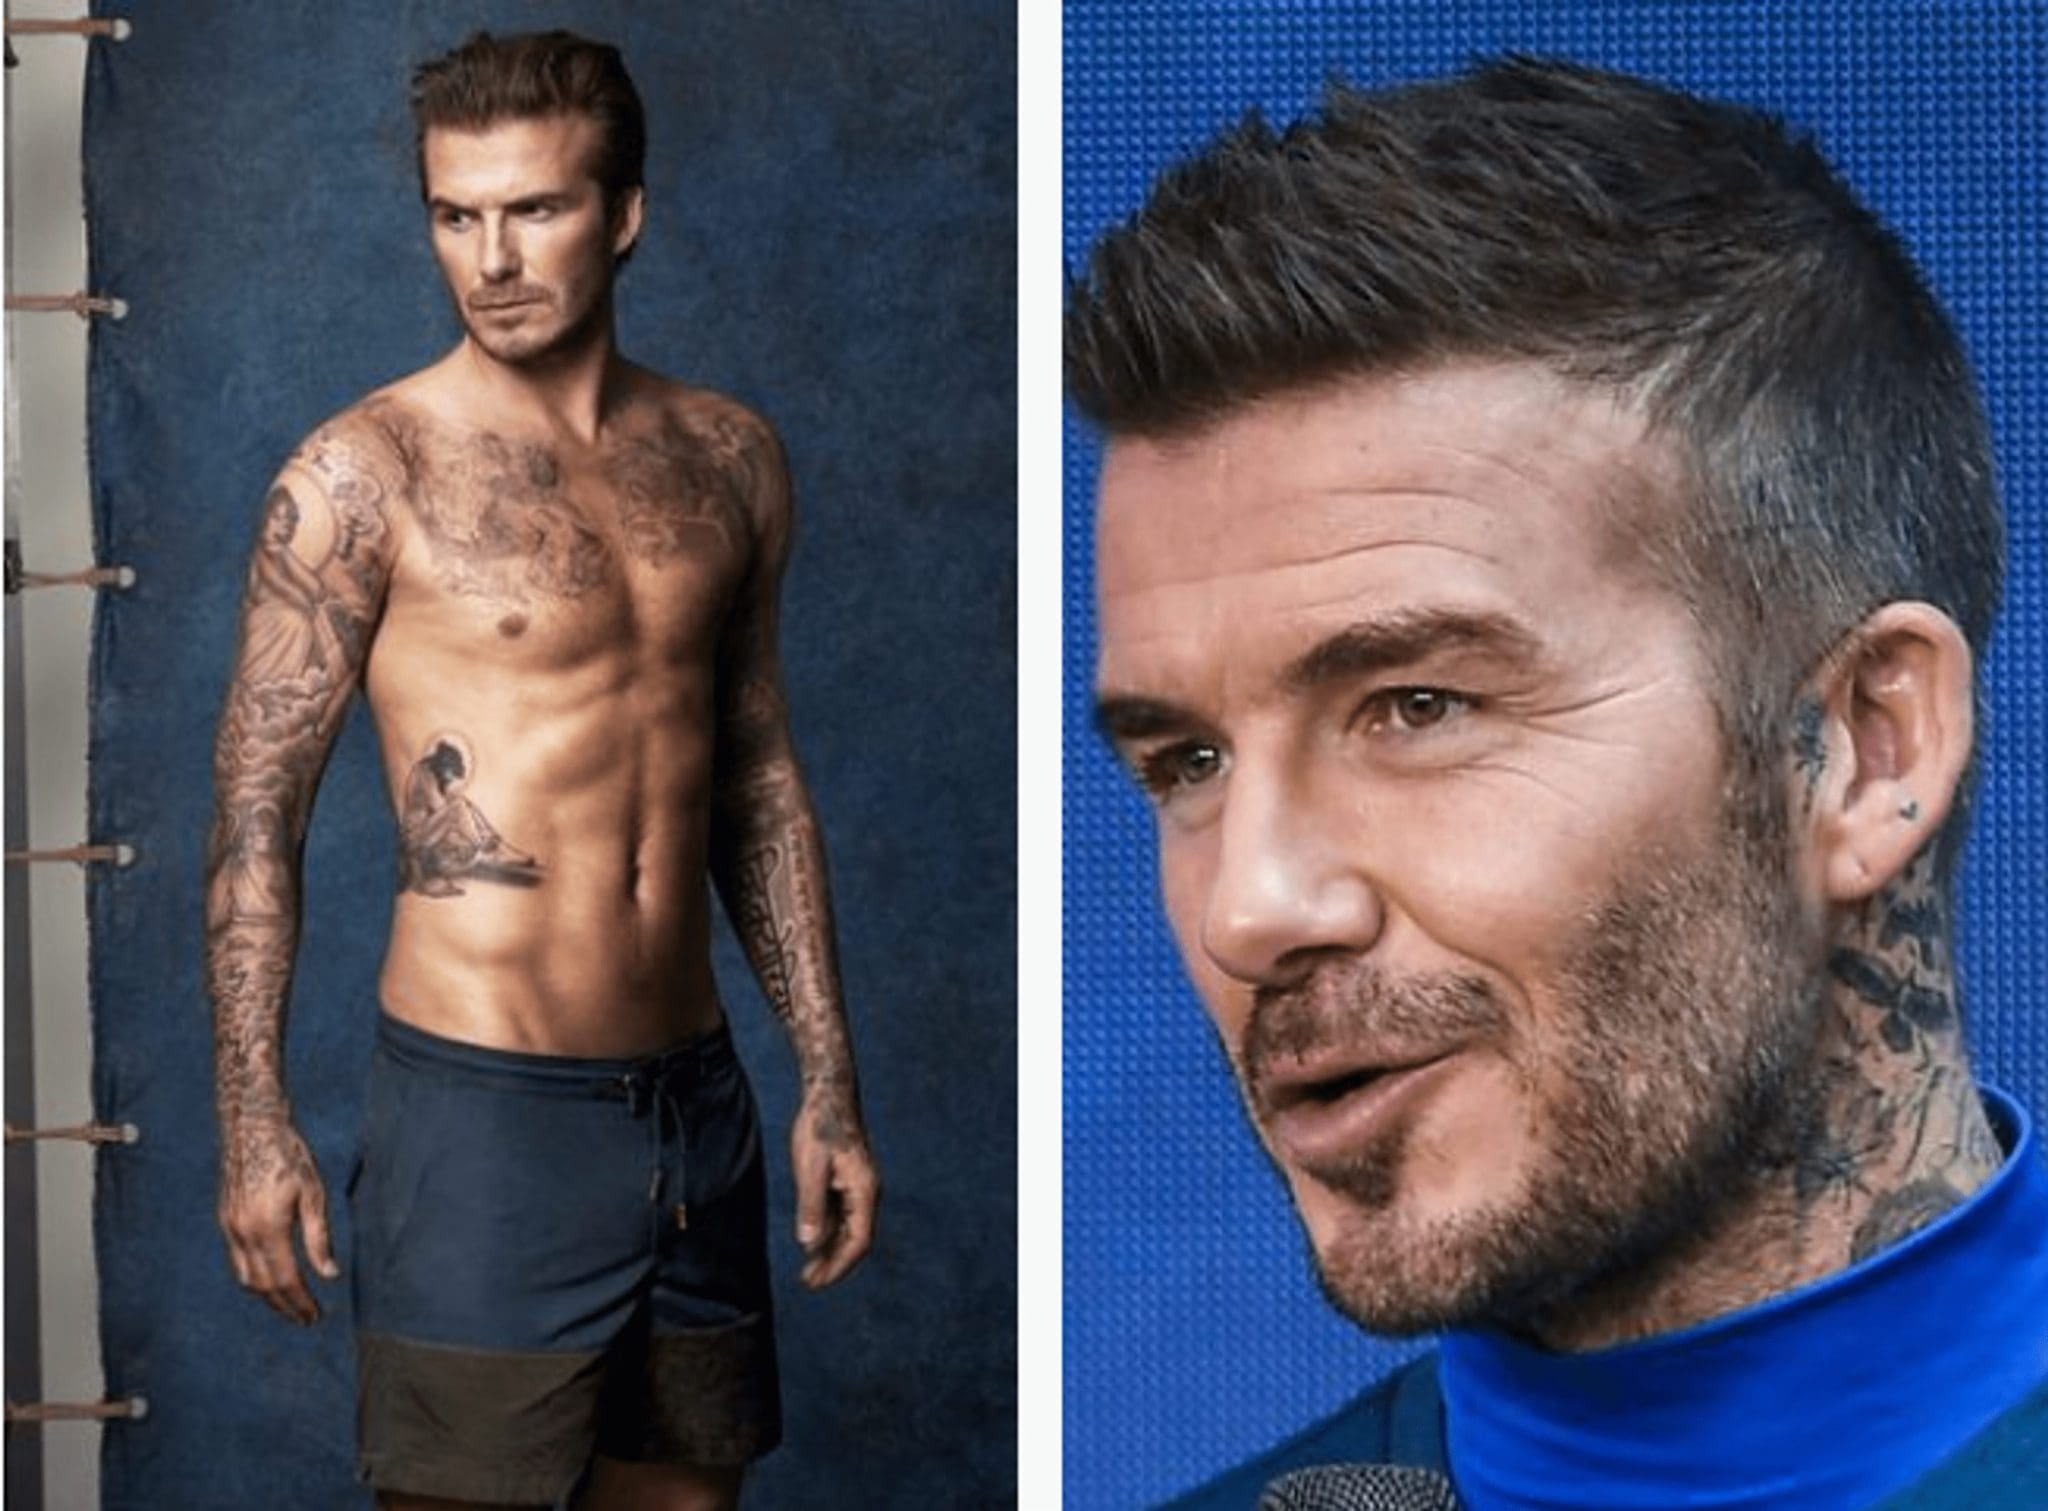 David Beckham forgot about the inscription dedicated to his wife, Victoria Beckham